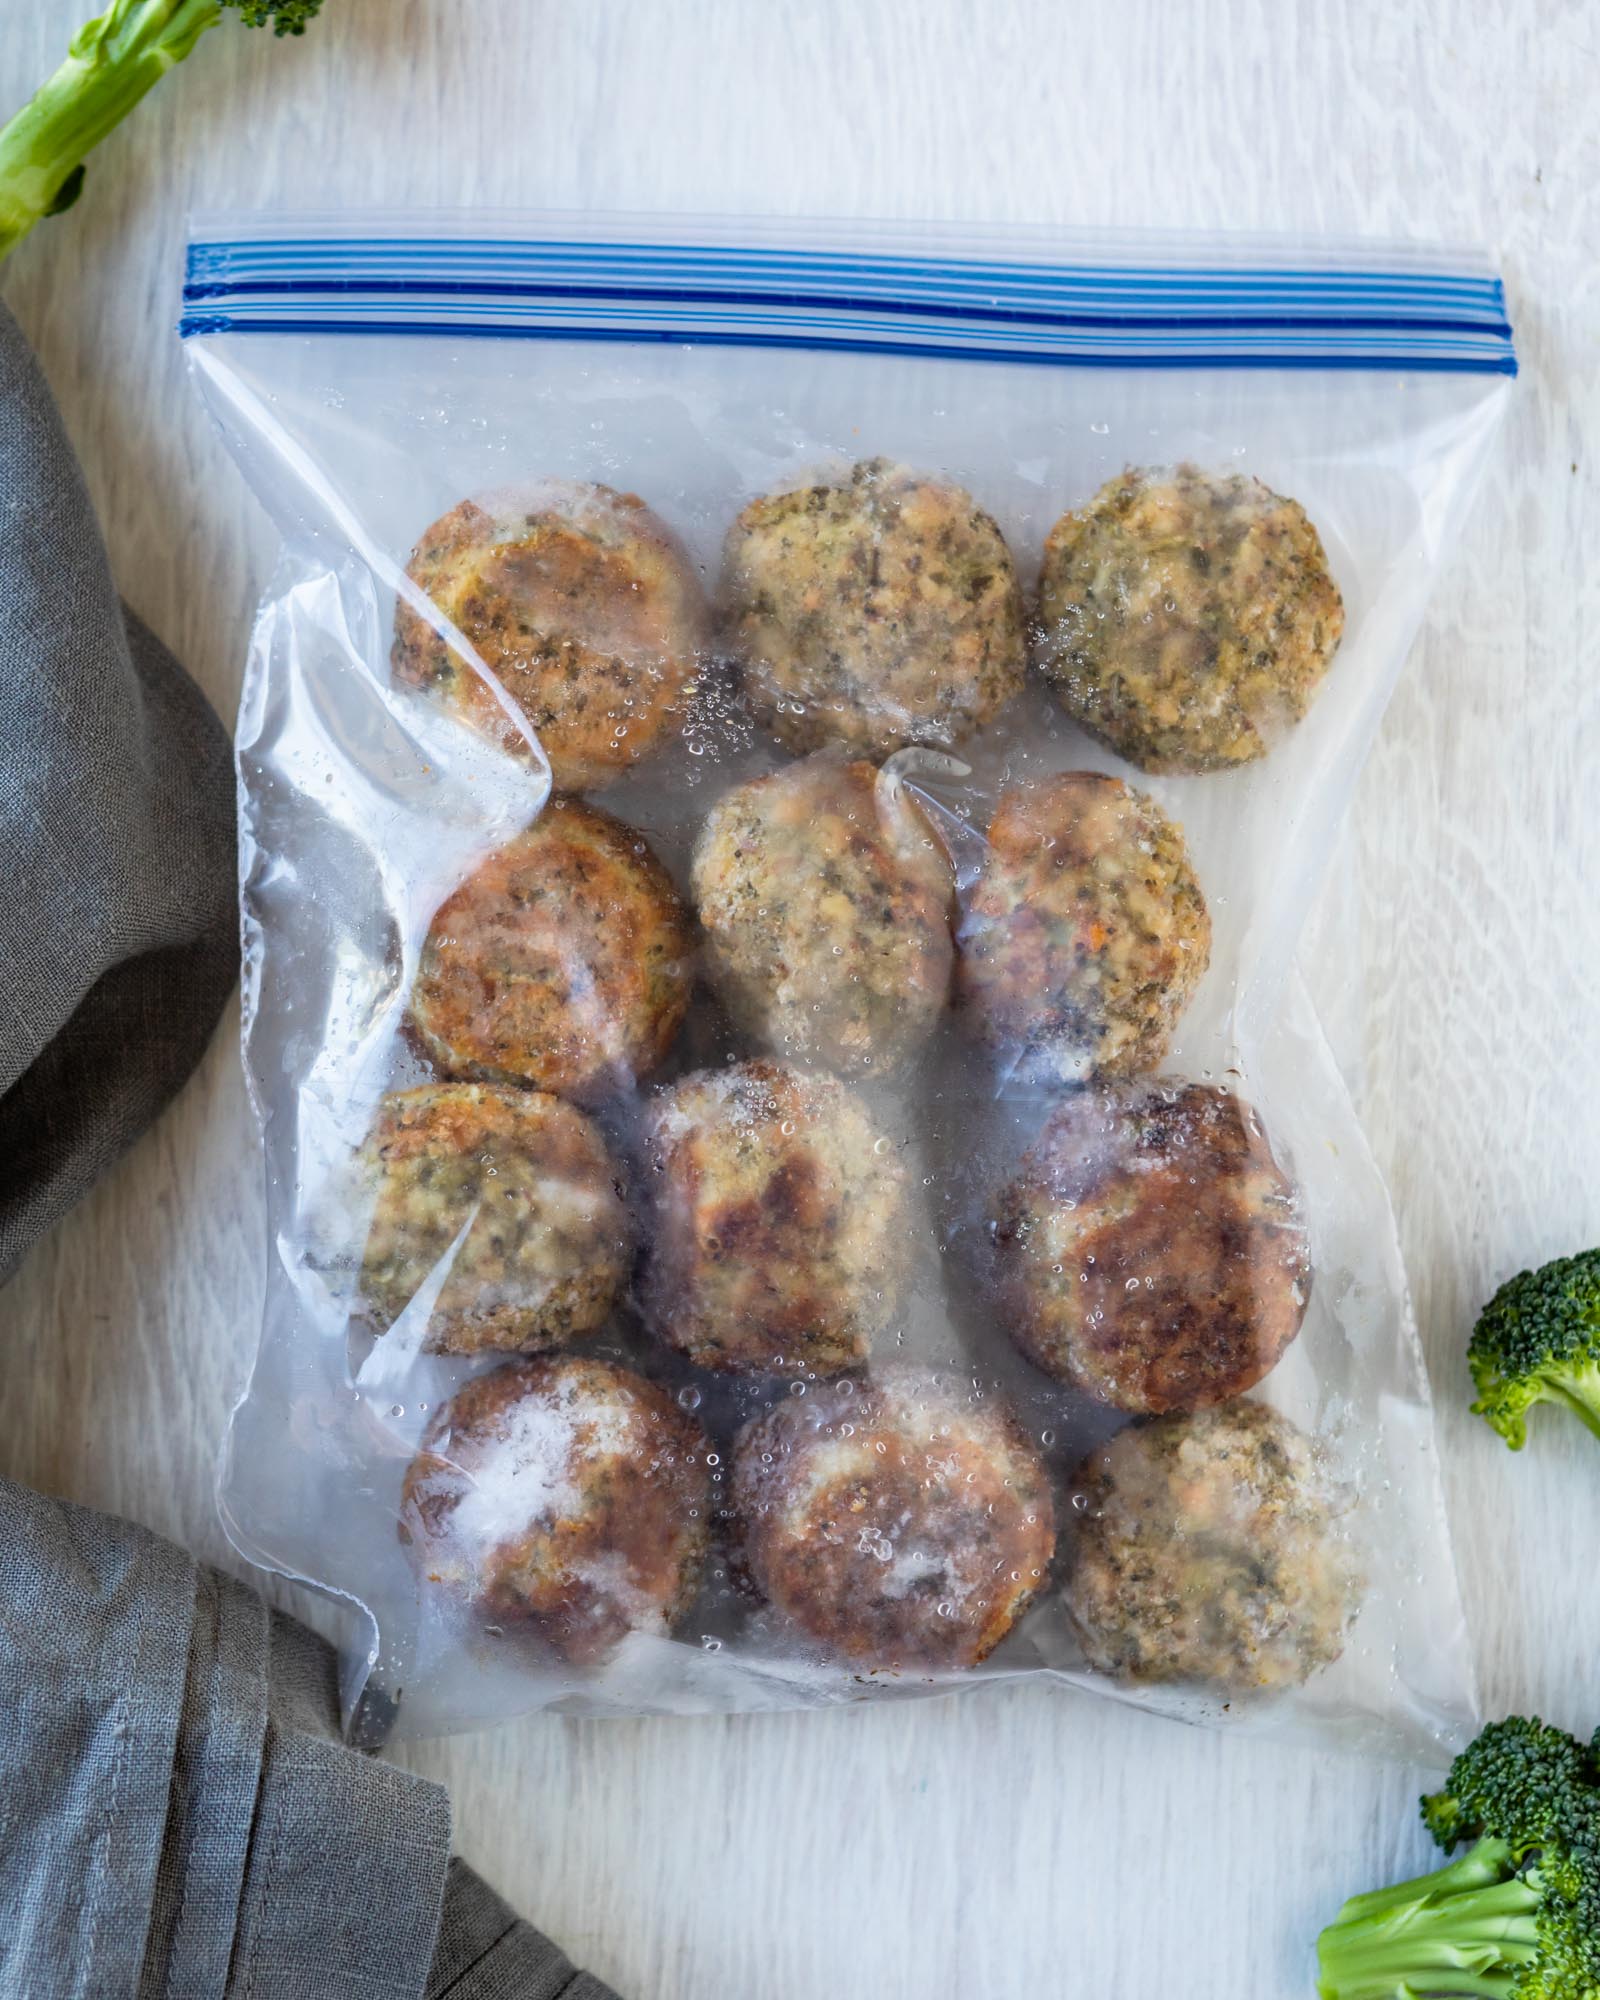 Our Favorite Meatless Meatballs - And Hey, They're Keto Too!